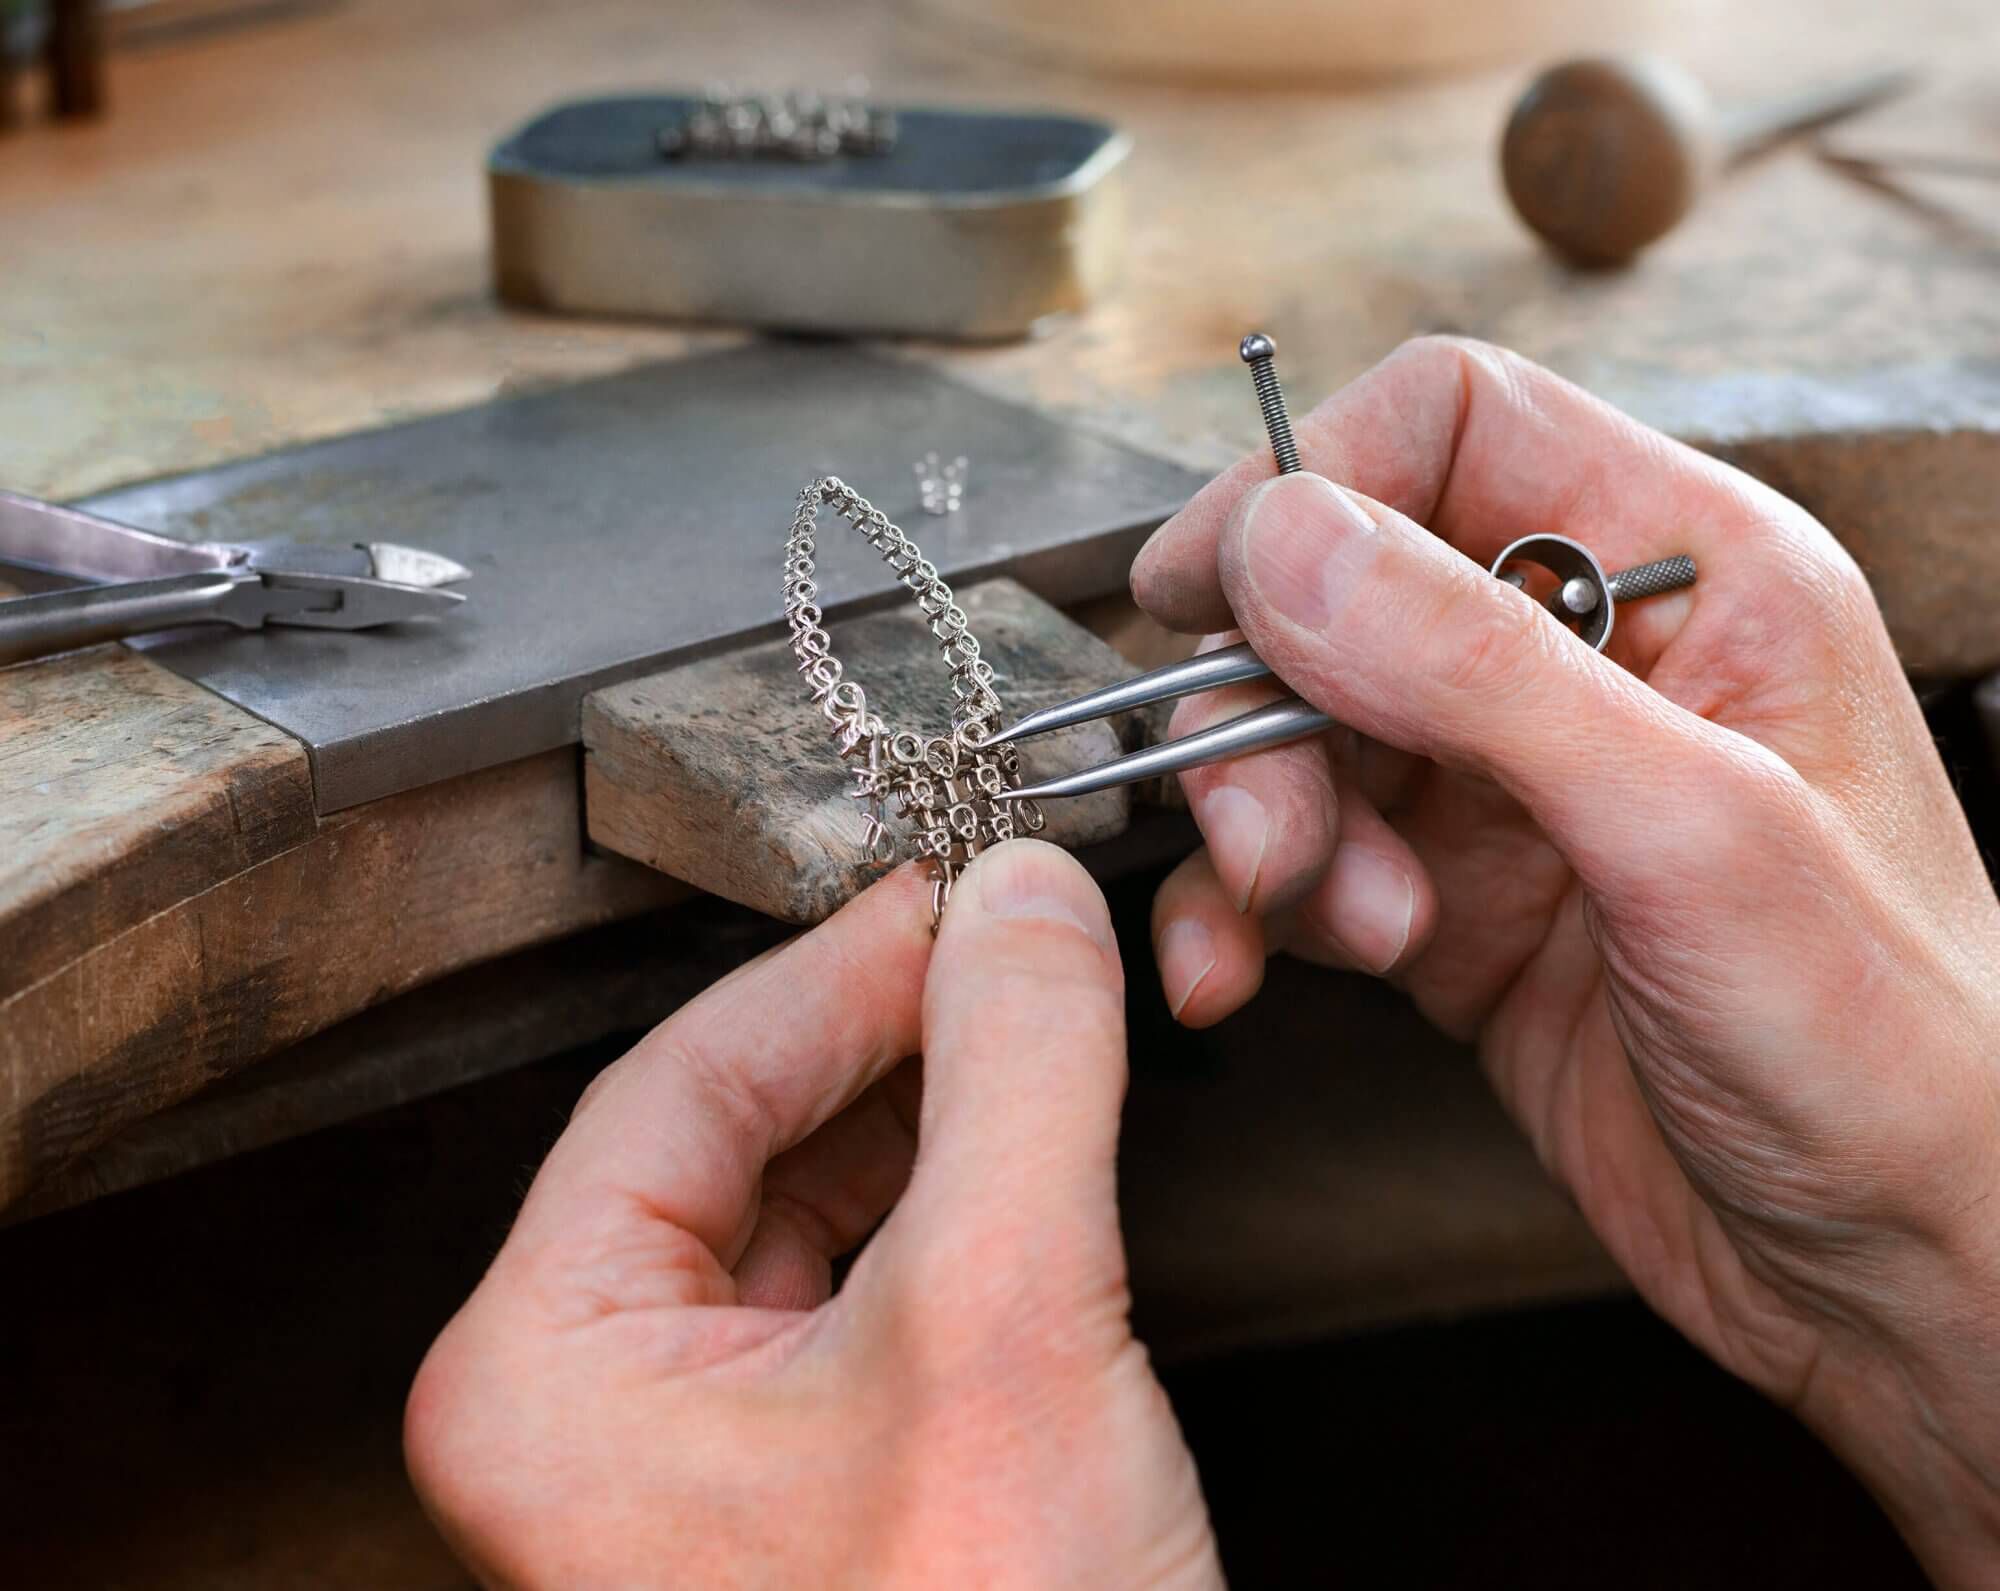 An artisan working on articulations within the earring setting